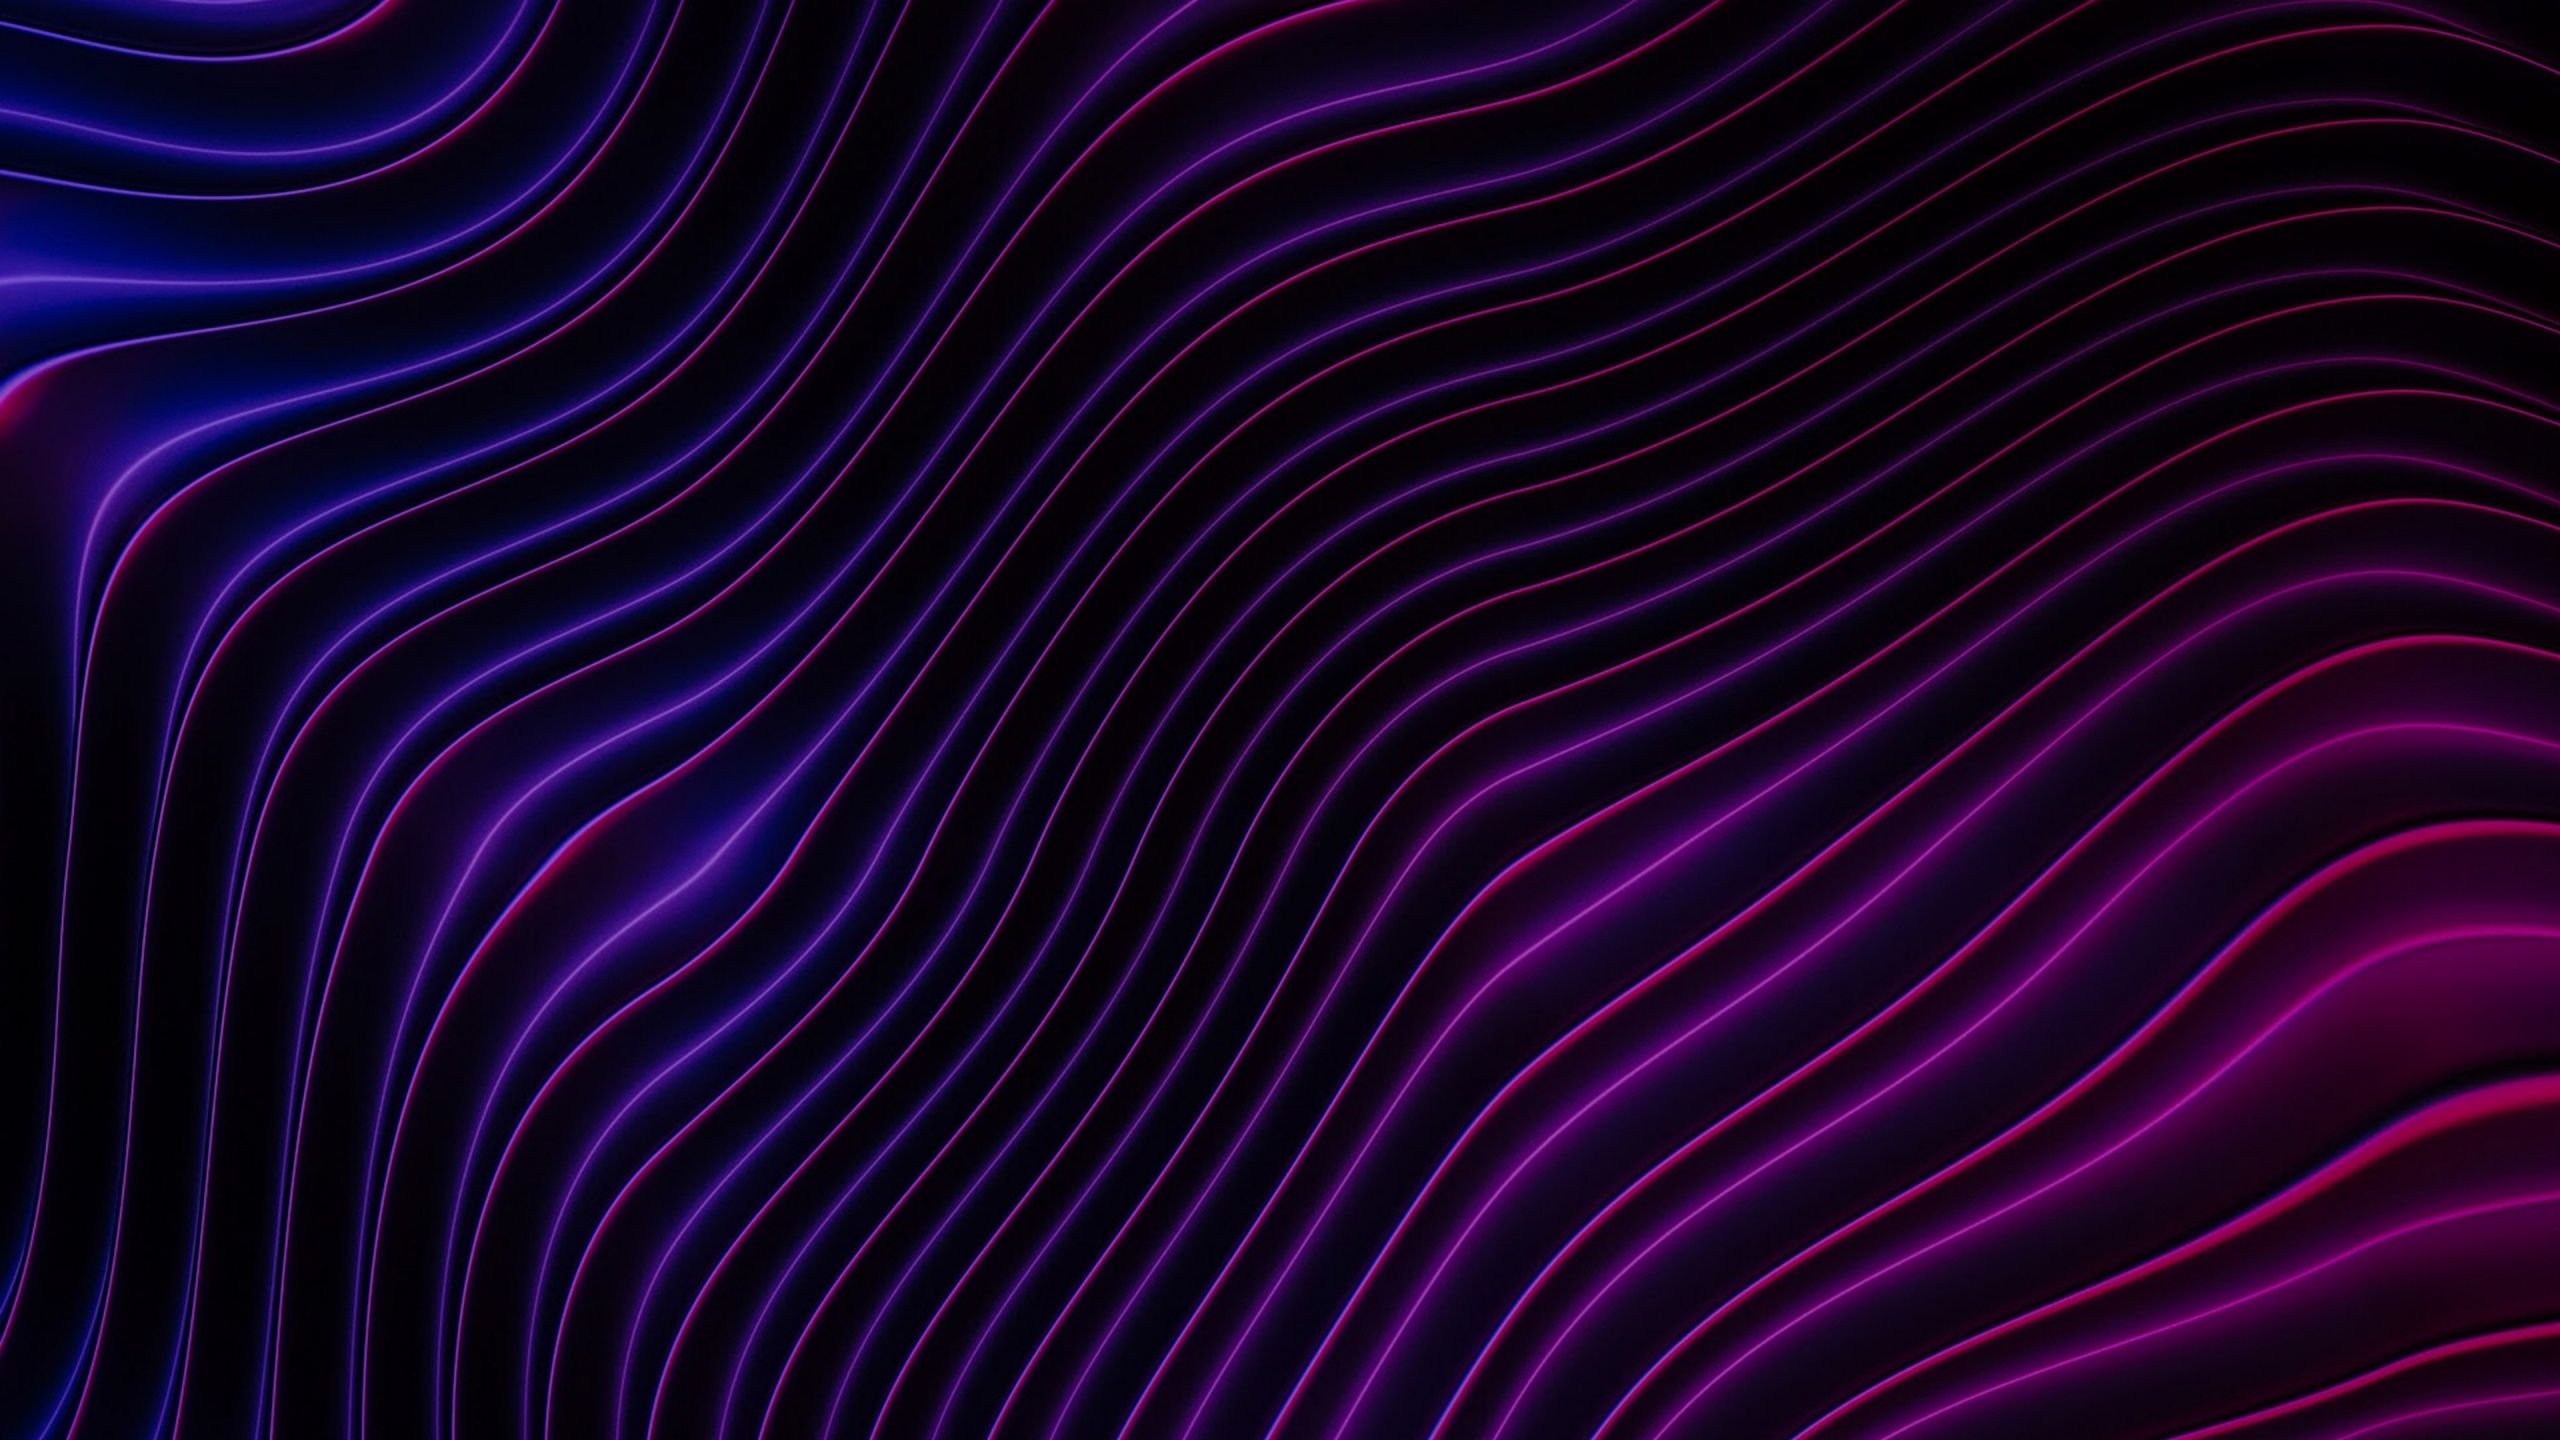 A purple and blue abstract background with wavy lines - 2560x1440